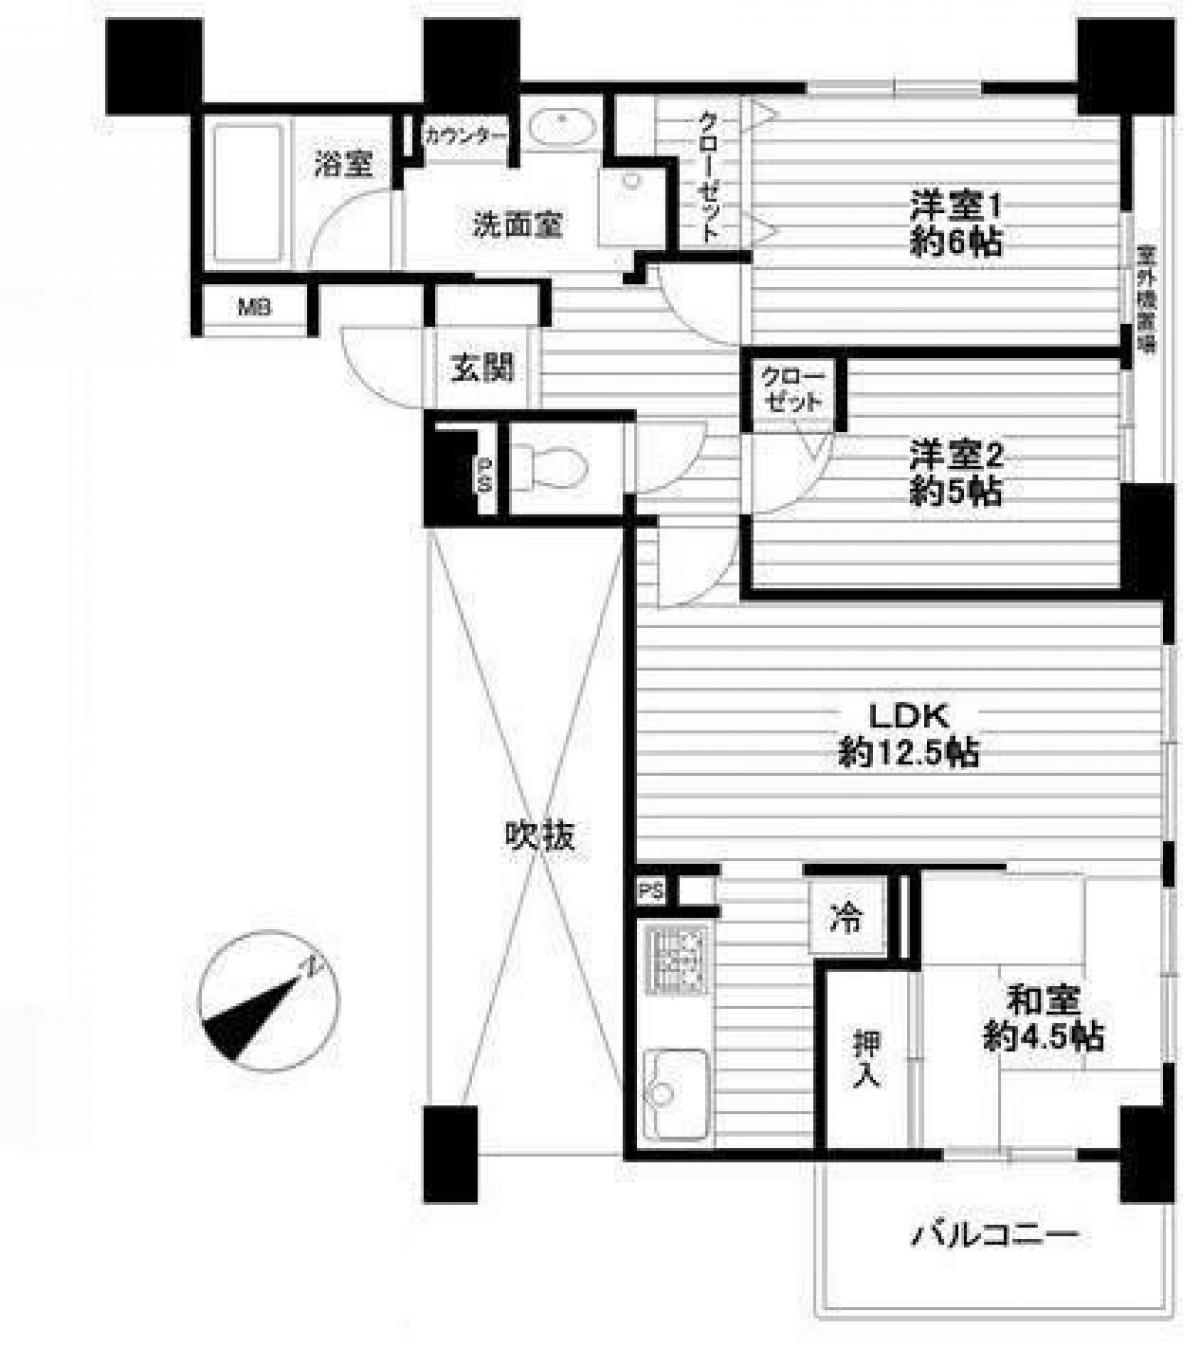 Picture of Apartment For Sale in Ome Shi, Tokyo, Japan